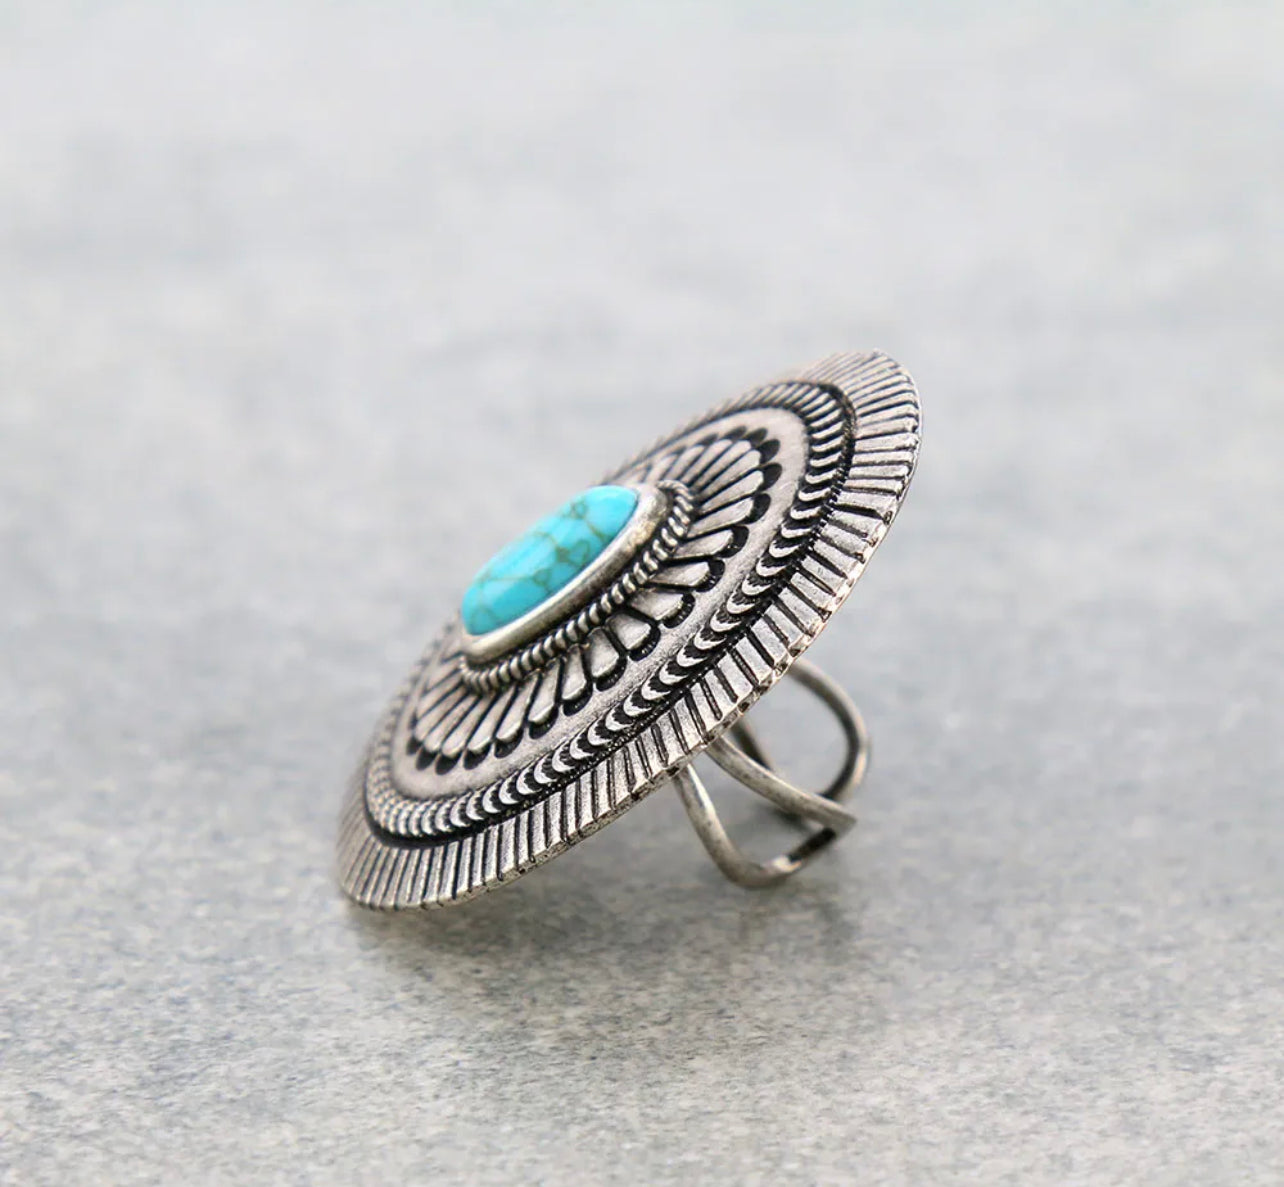 The Cowgirl Concho Ring